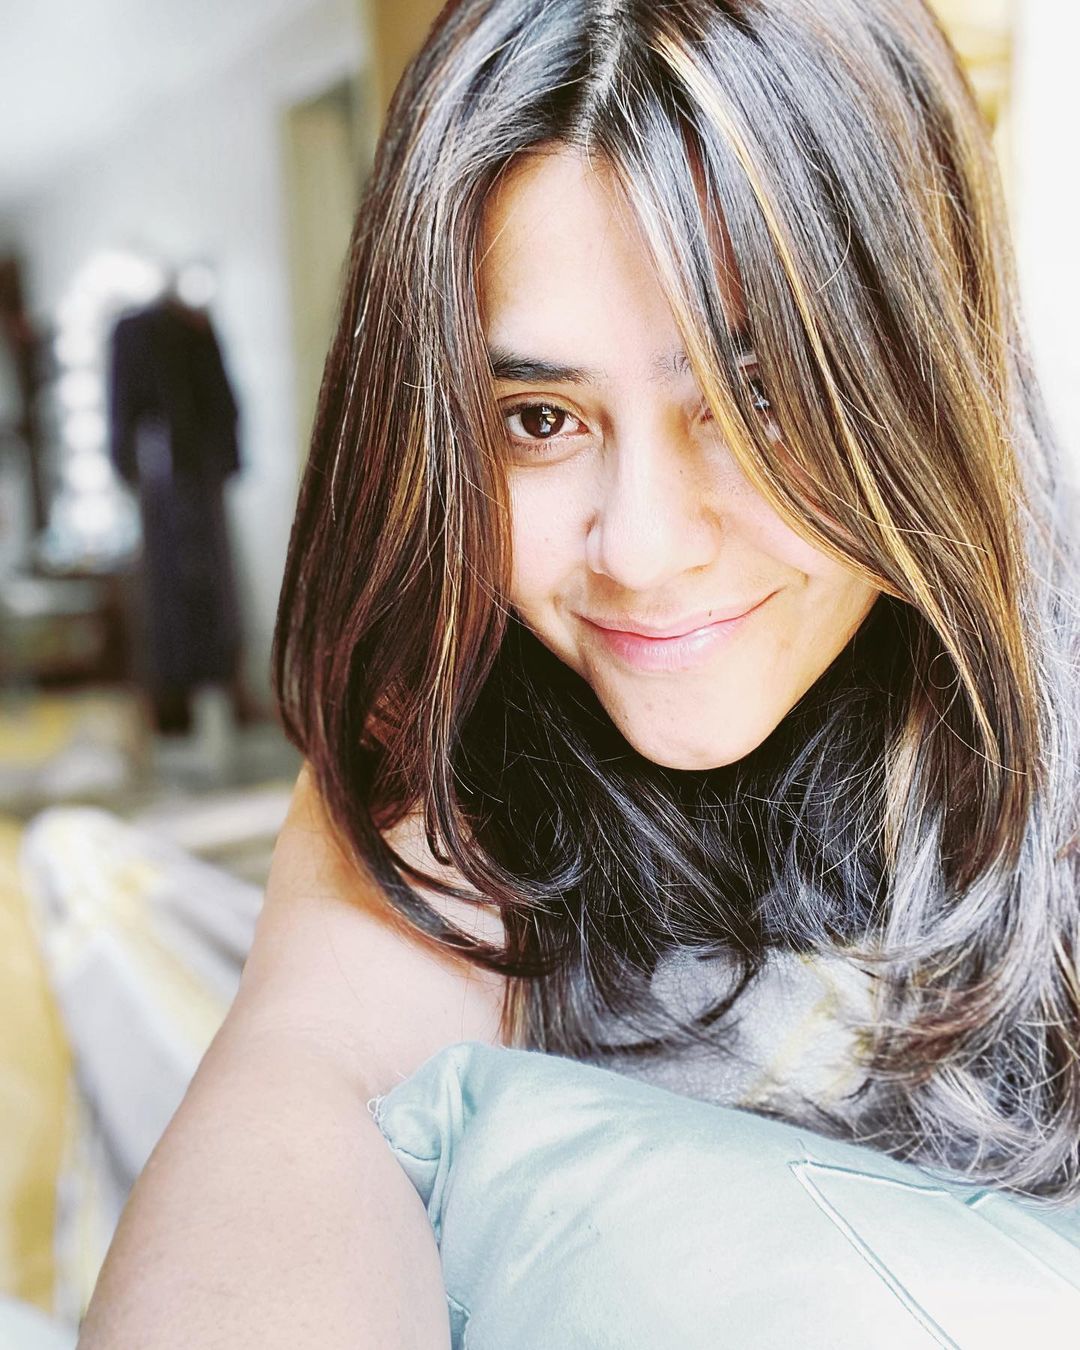 Ekta Kapoor Talks About Creating Opportunities For Budding Writers, Reveals How Kyunki... Came About